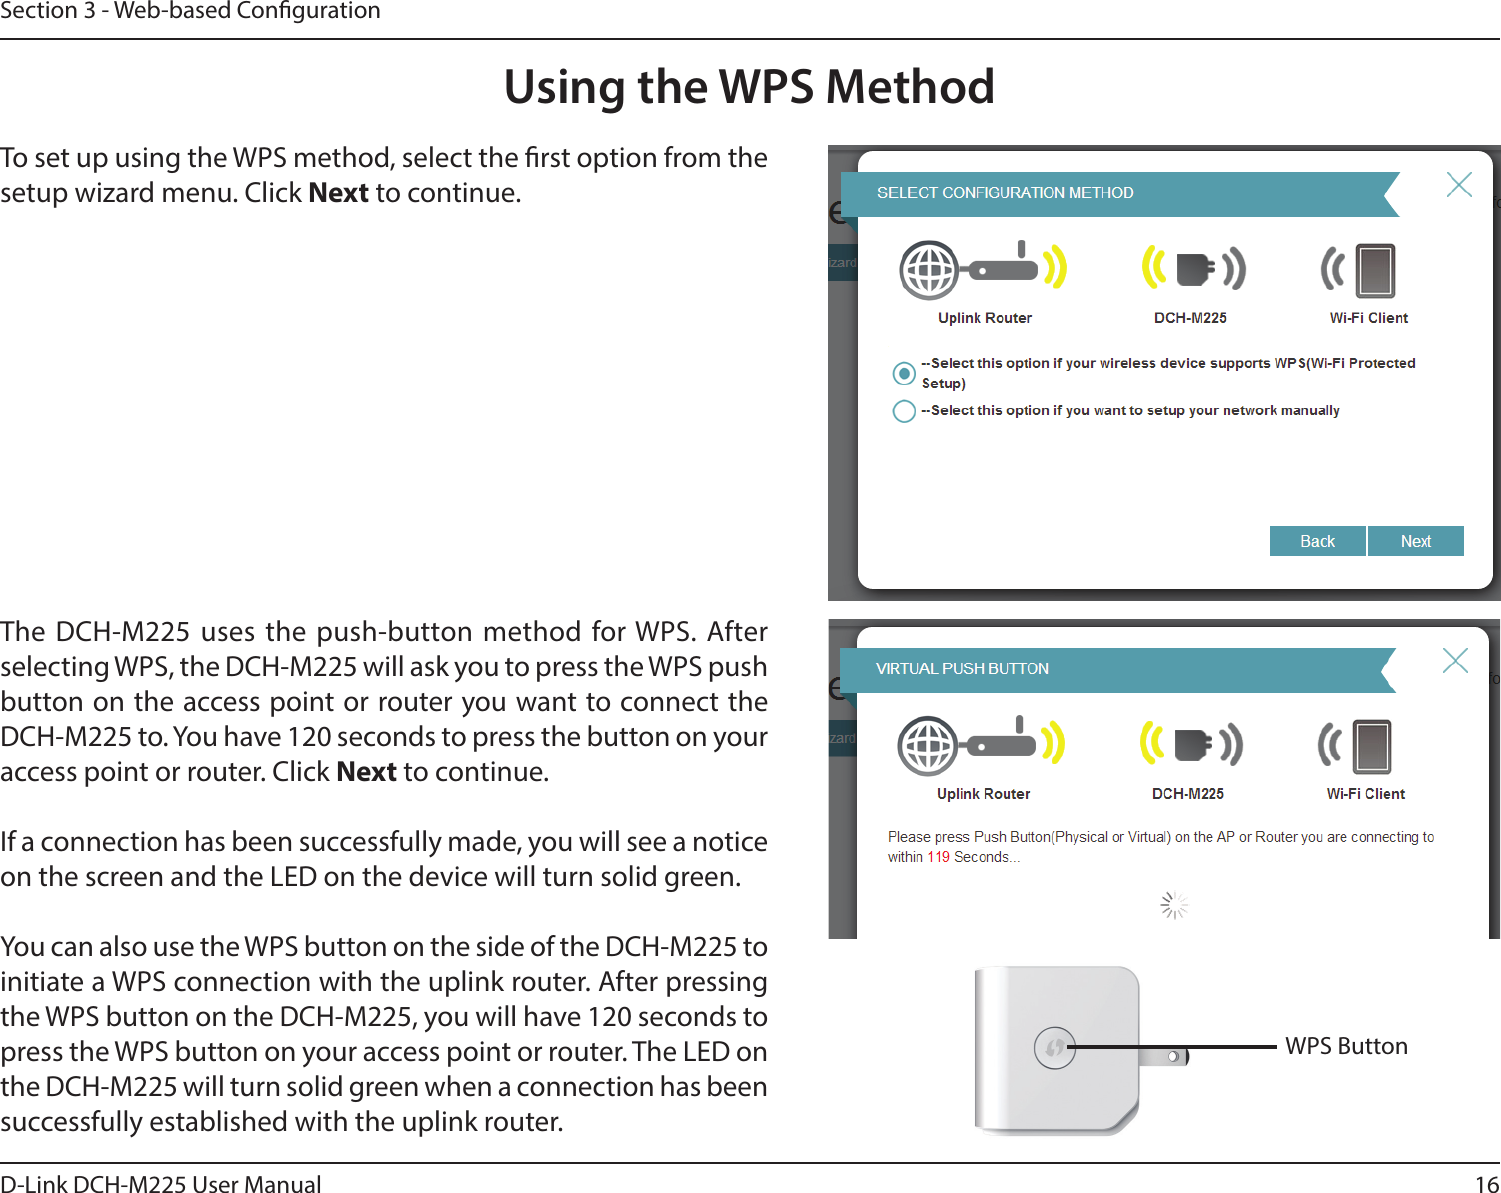 16D-Link DCH-M225 User ManualSection 3 - Web-based CongurationTo set up using the WPS method, select the rst option from the setup wizard menu. Click Next to continue.The  DCH-M225  uses  the  push-button  method  for WPS. After selecting WPS, the DCH-M225 will ask you to press the WPS push button on the access point or router you want to connect the DCH-M225 to. You have 120 seconds to press the button on your access point or router. Click Next to continue.If a connection has been successfully made, you will see a notice on the screen and the LED on the device will turn solid green.You can also use the WPS button on the side of the DCH-M225 to initiate a WPS connection with the uplink router. After pressing the WPS button on the DCH-M225, you will have 120 seconds to press the WPS button on your access point or router. The LED on the DCH-M225 will turn solid green when a connection has been successfully established with the uplink router. Using the WPS Method WPS Button